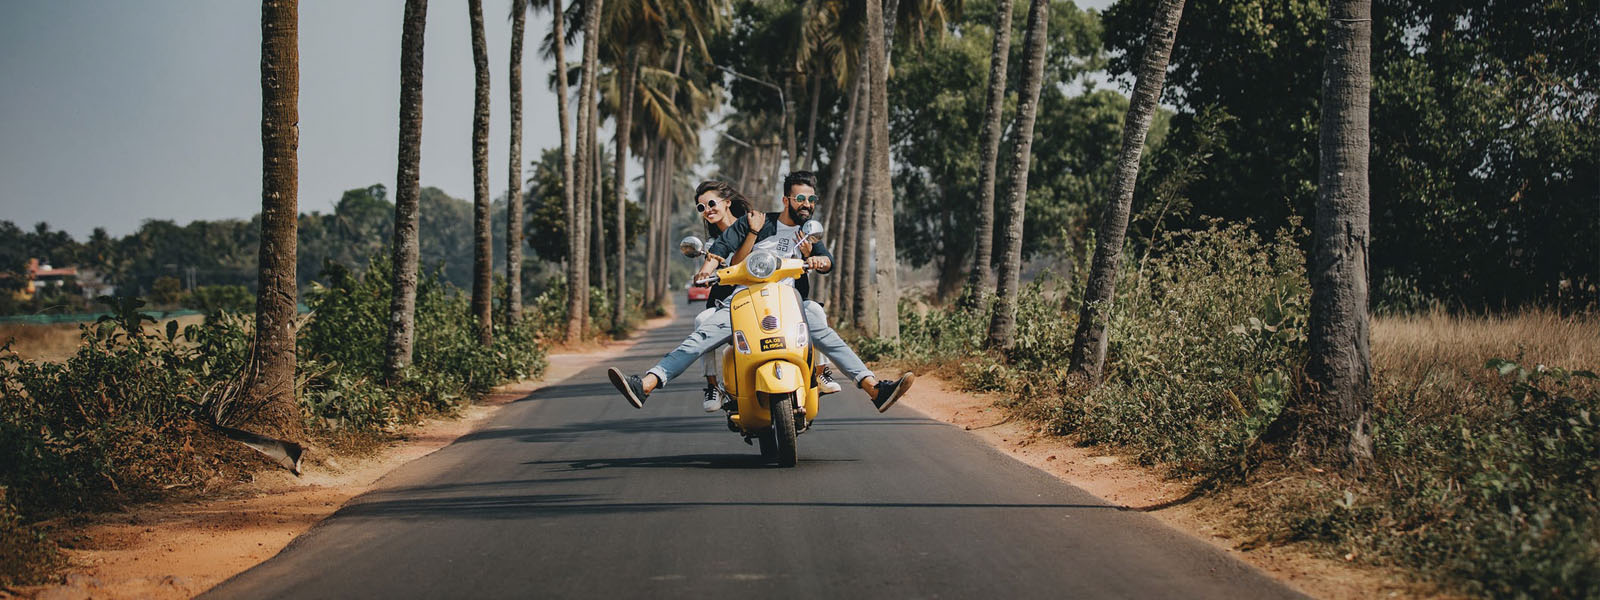 A couple riding on a motorbike 